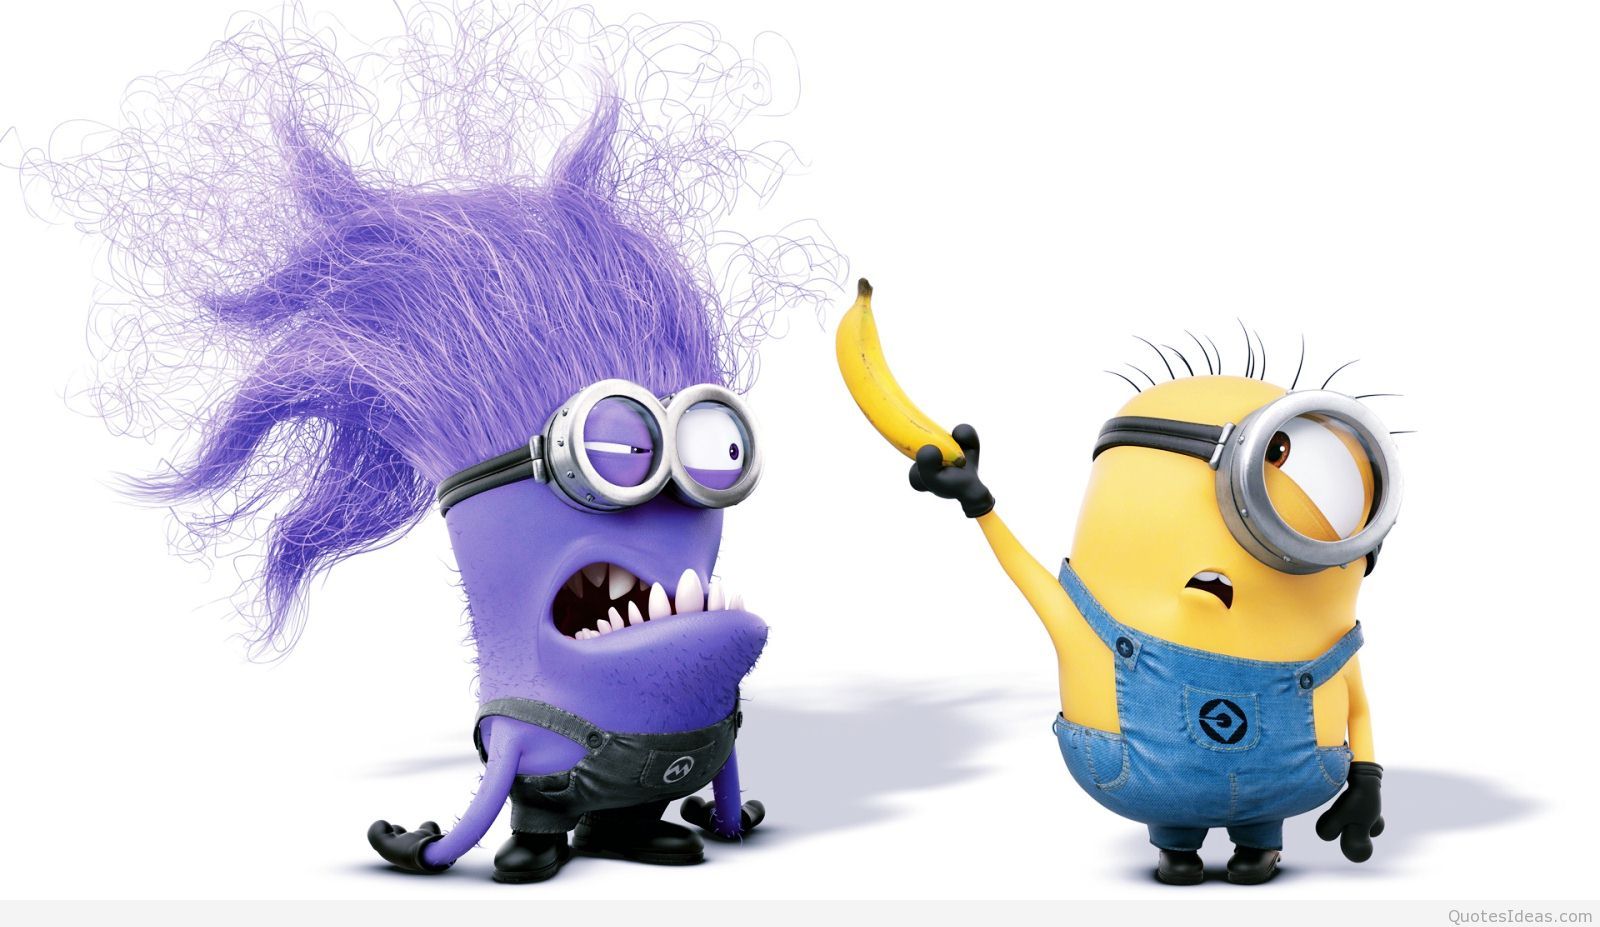 Amazing Wallpaper With Minions For Desktop Background And Mobile